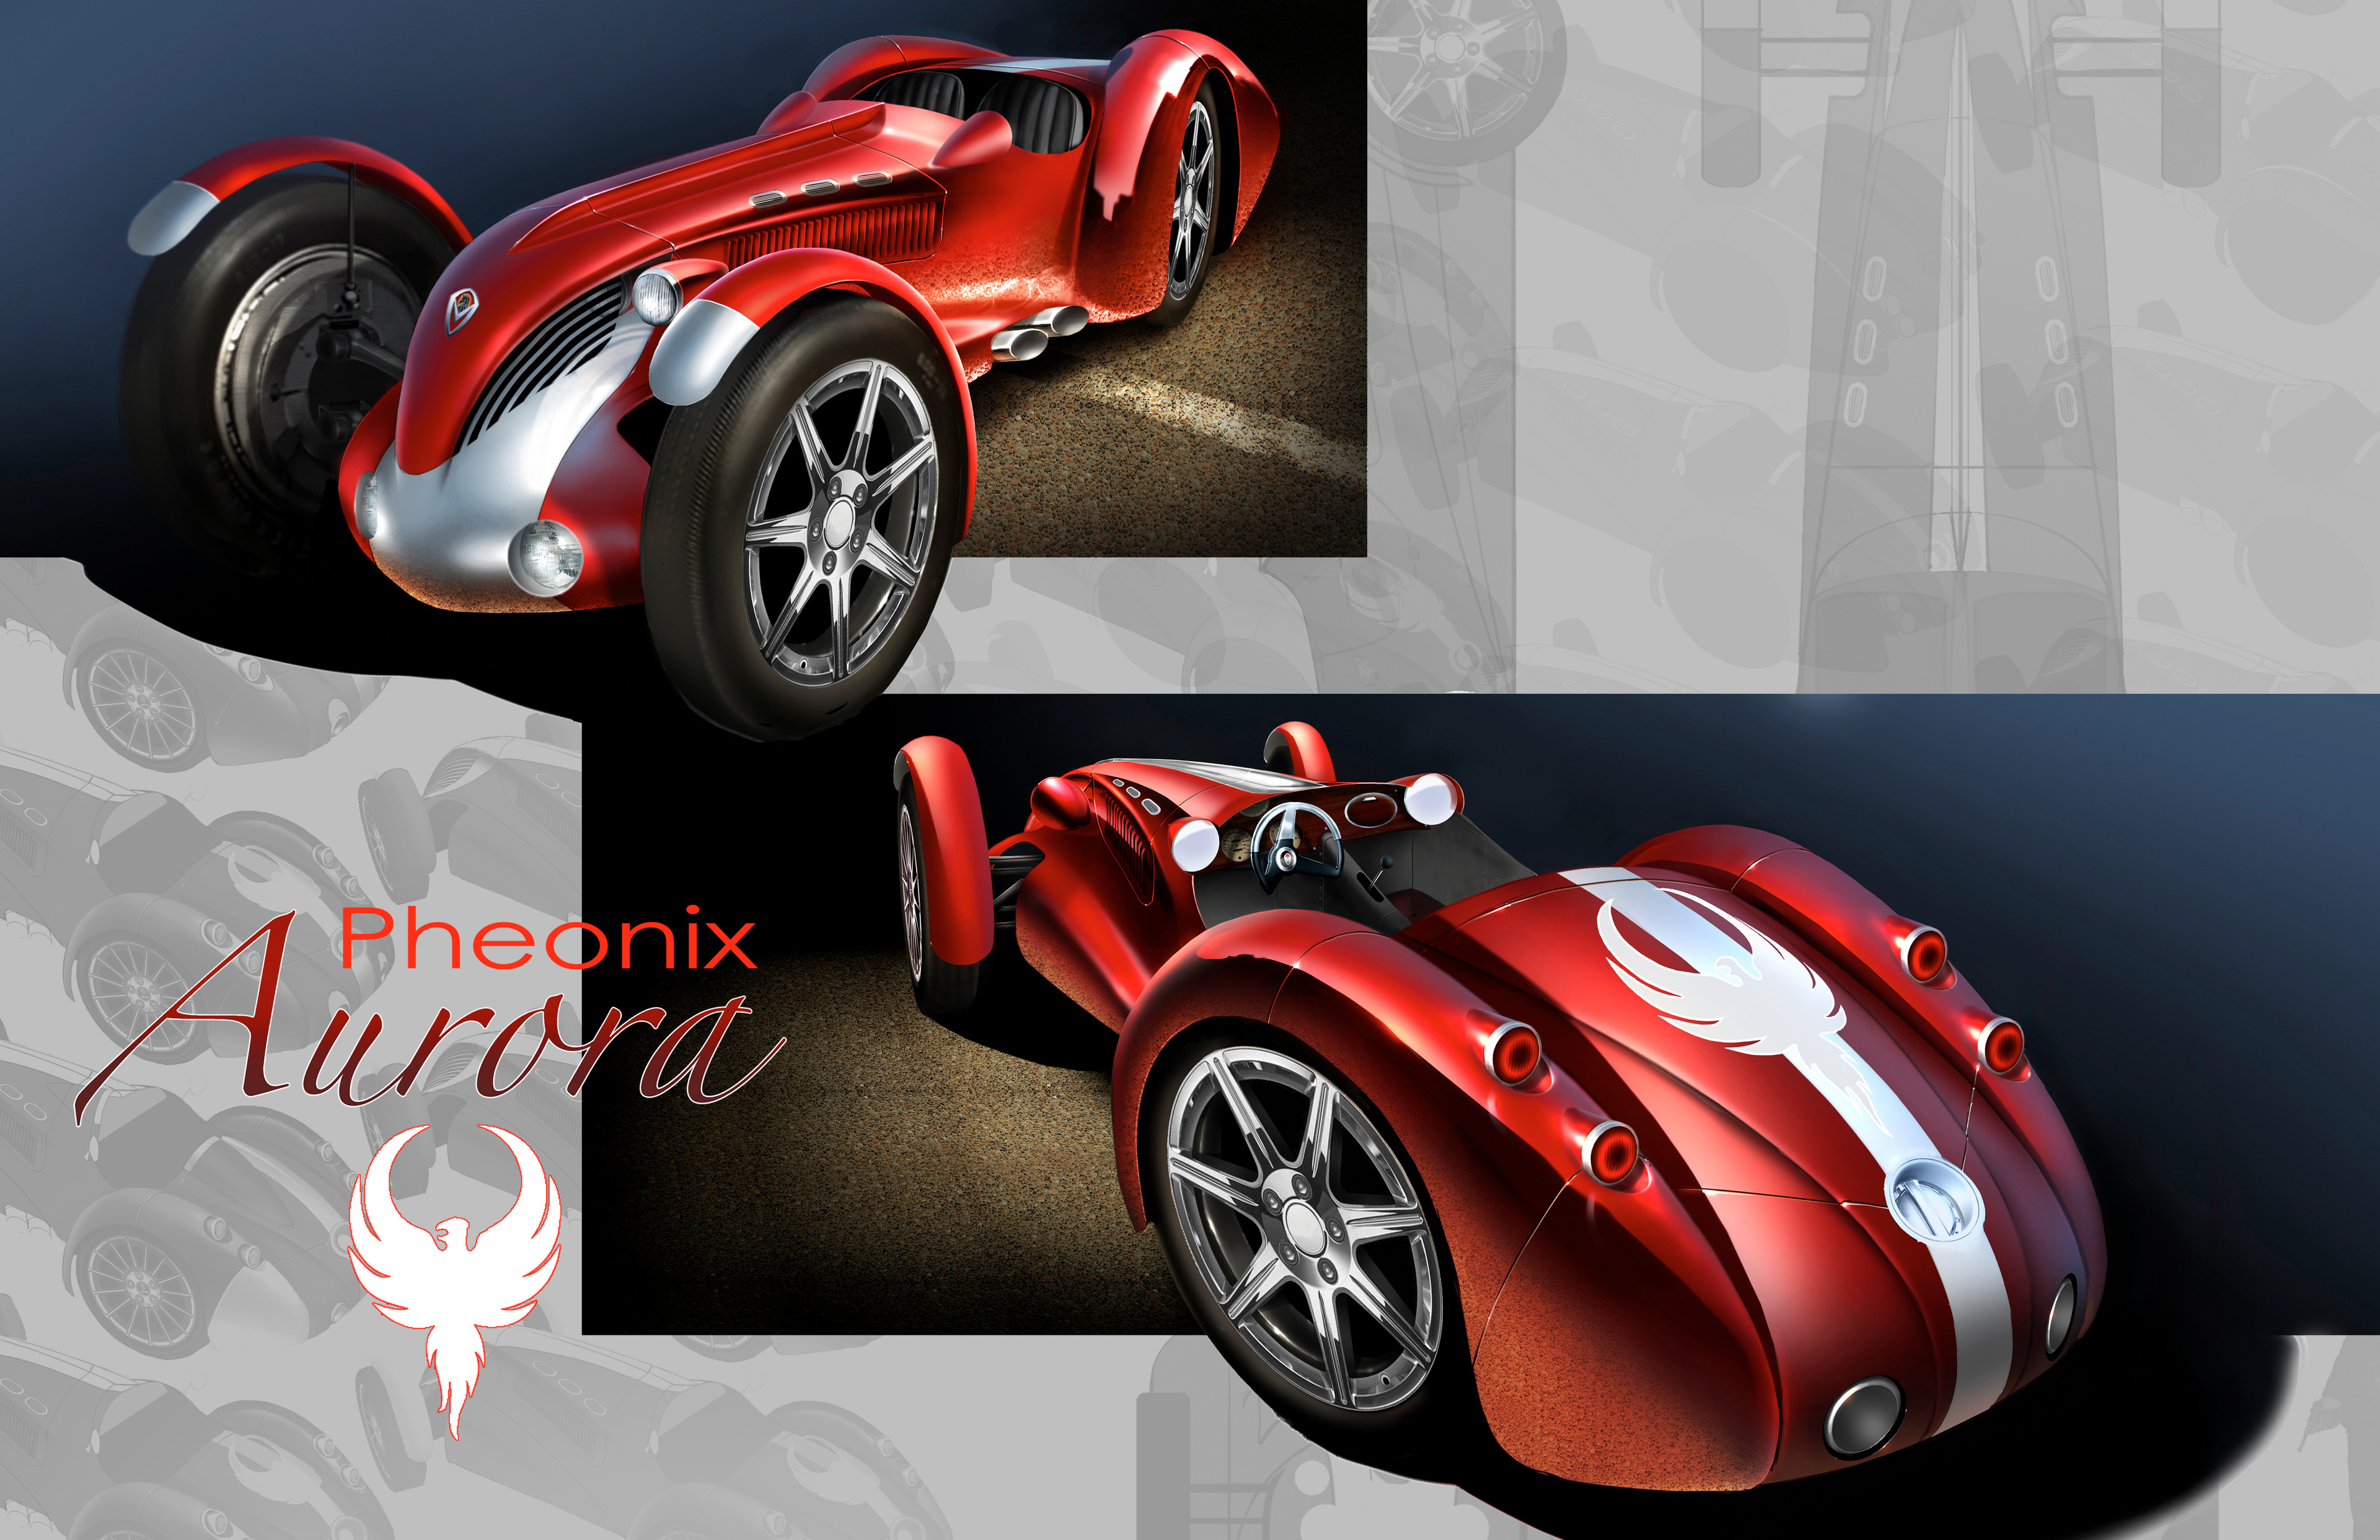 The Pheonix Aurora represents the culmination of the Aurora legacy.  Designed by Sean and Vitori before the final race, the Pheonix is made even more powerful by its Nitro engine and trunk full of explosives!